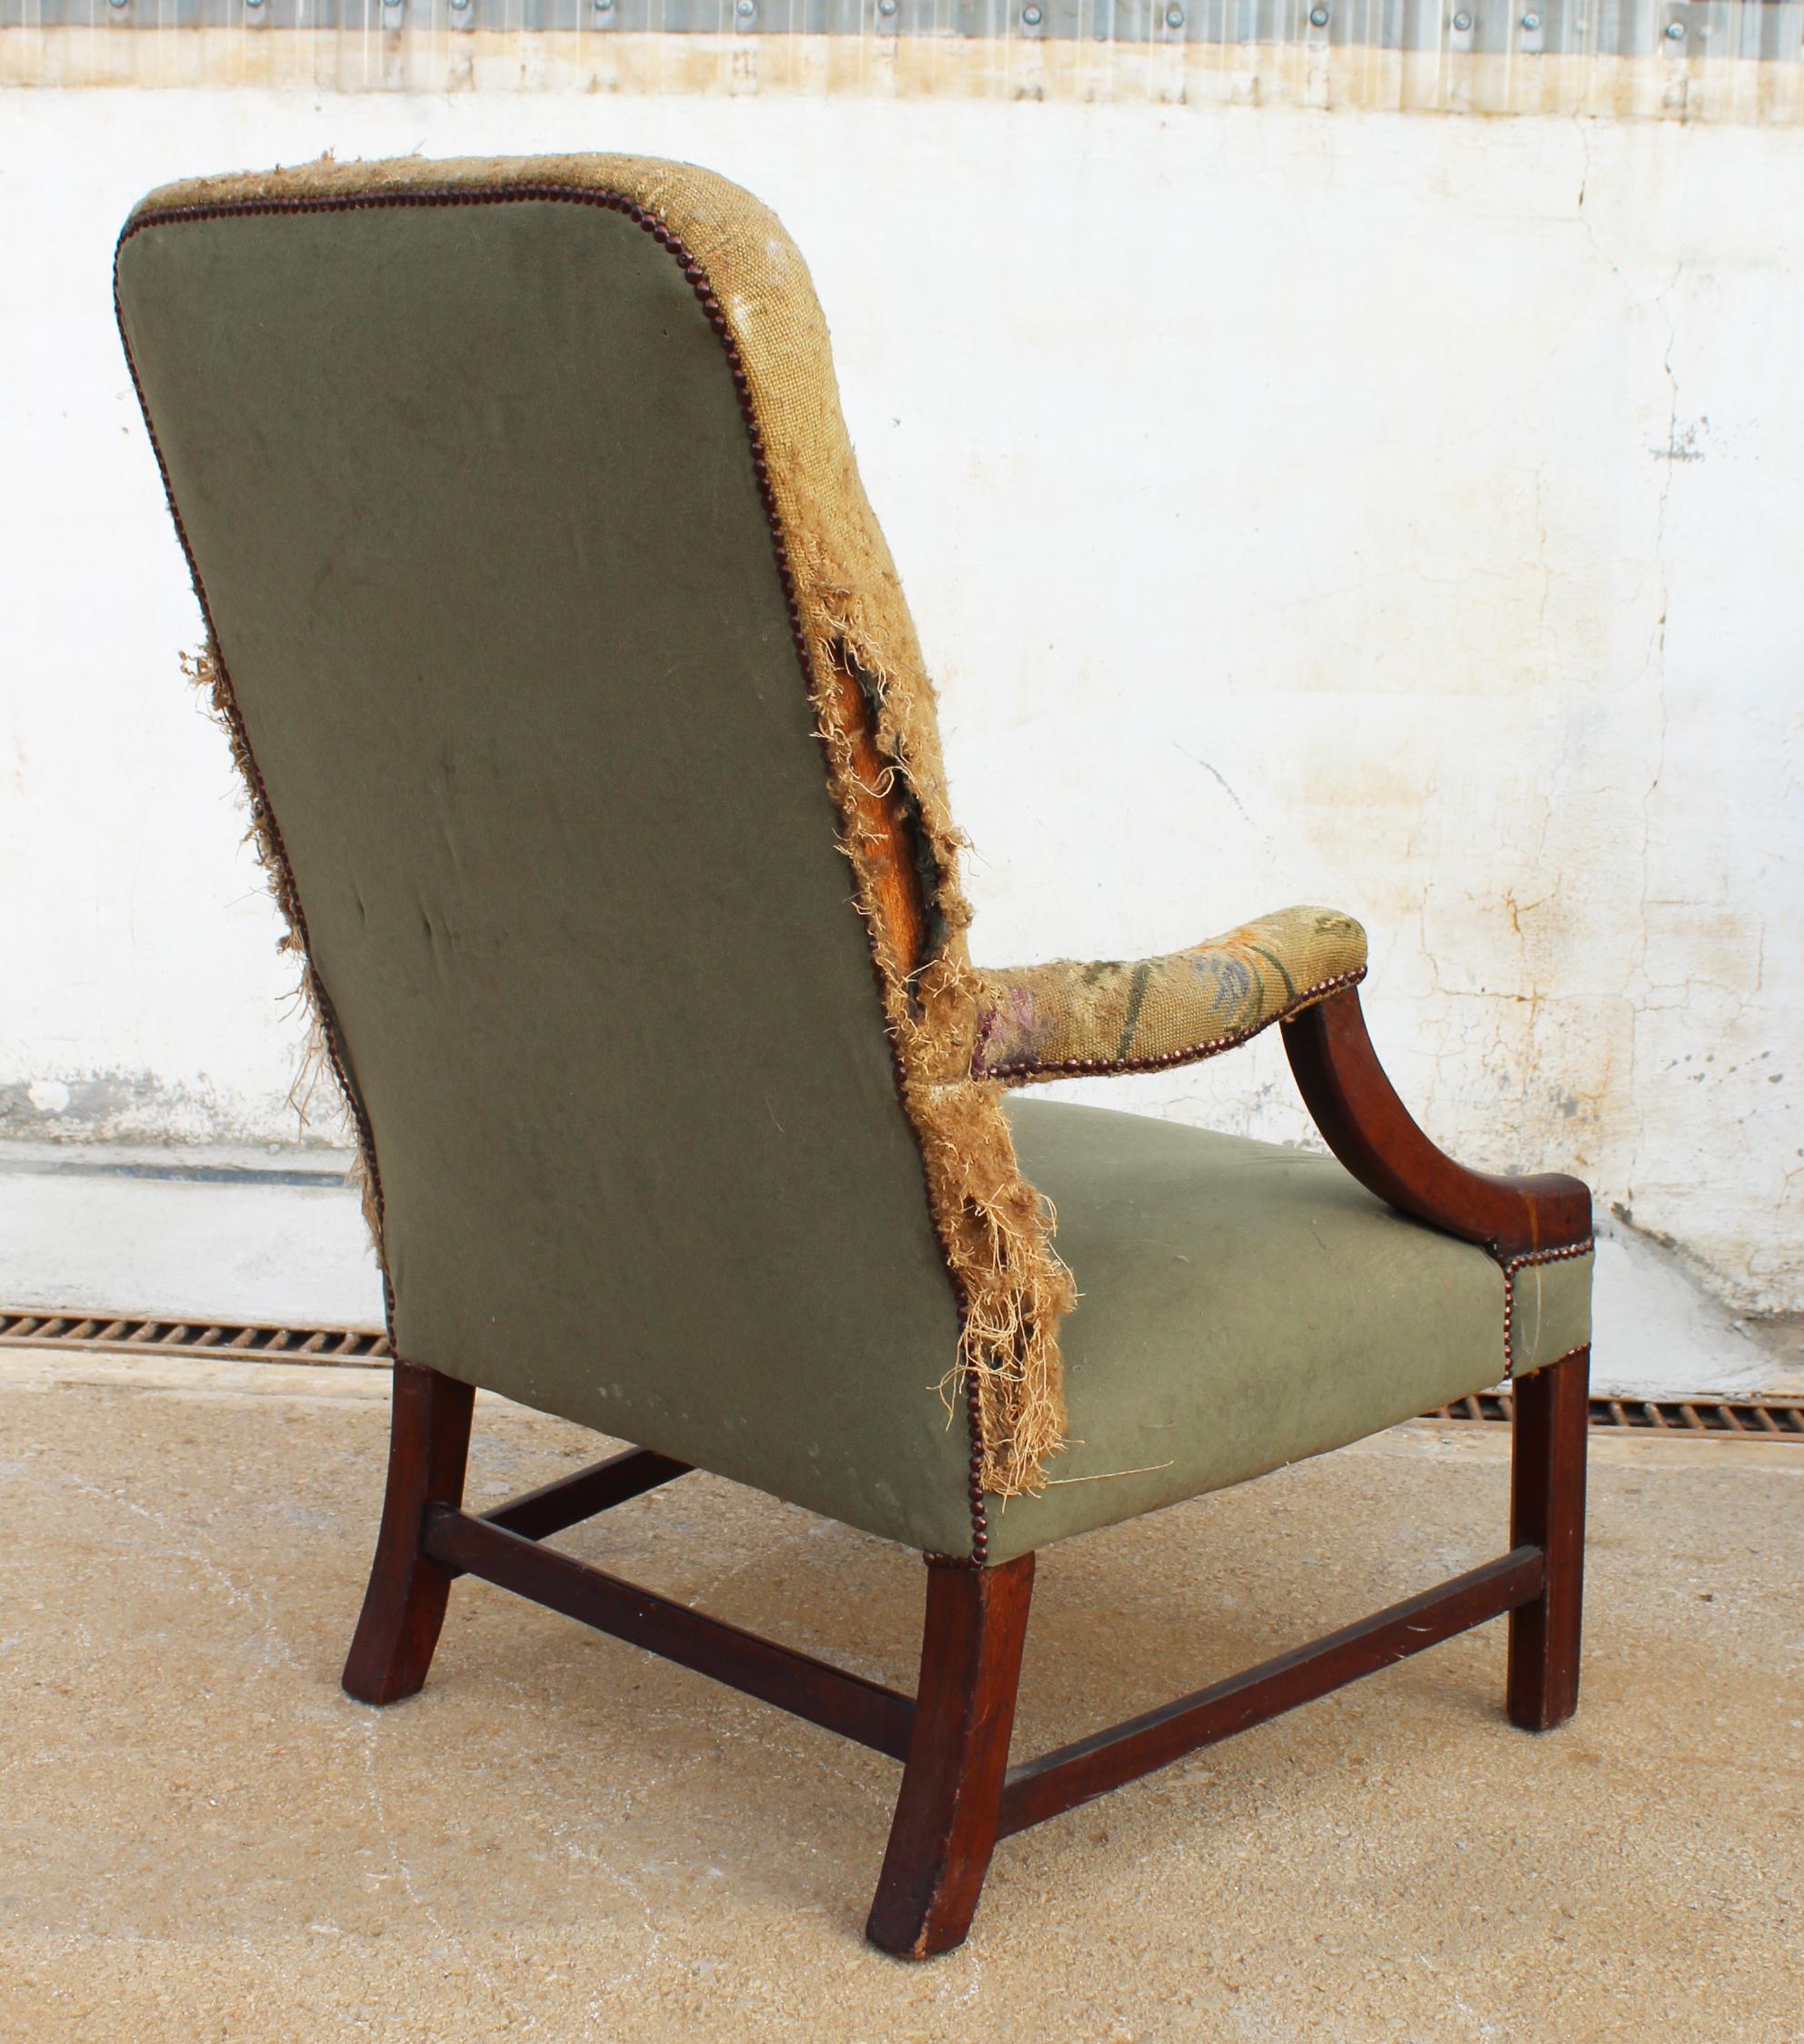 19th Century English Mahogany Armchair with Upholstery That Needs Repair 2